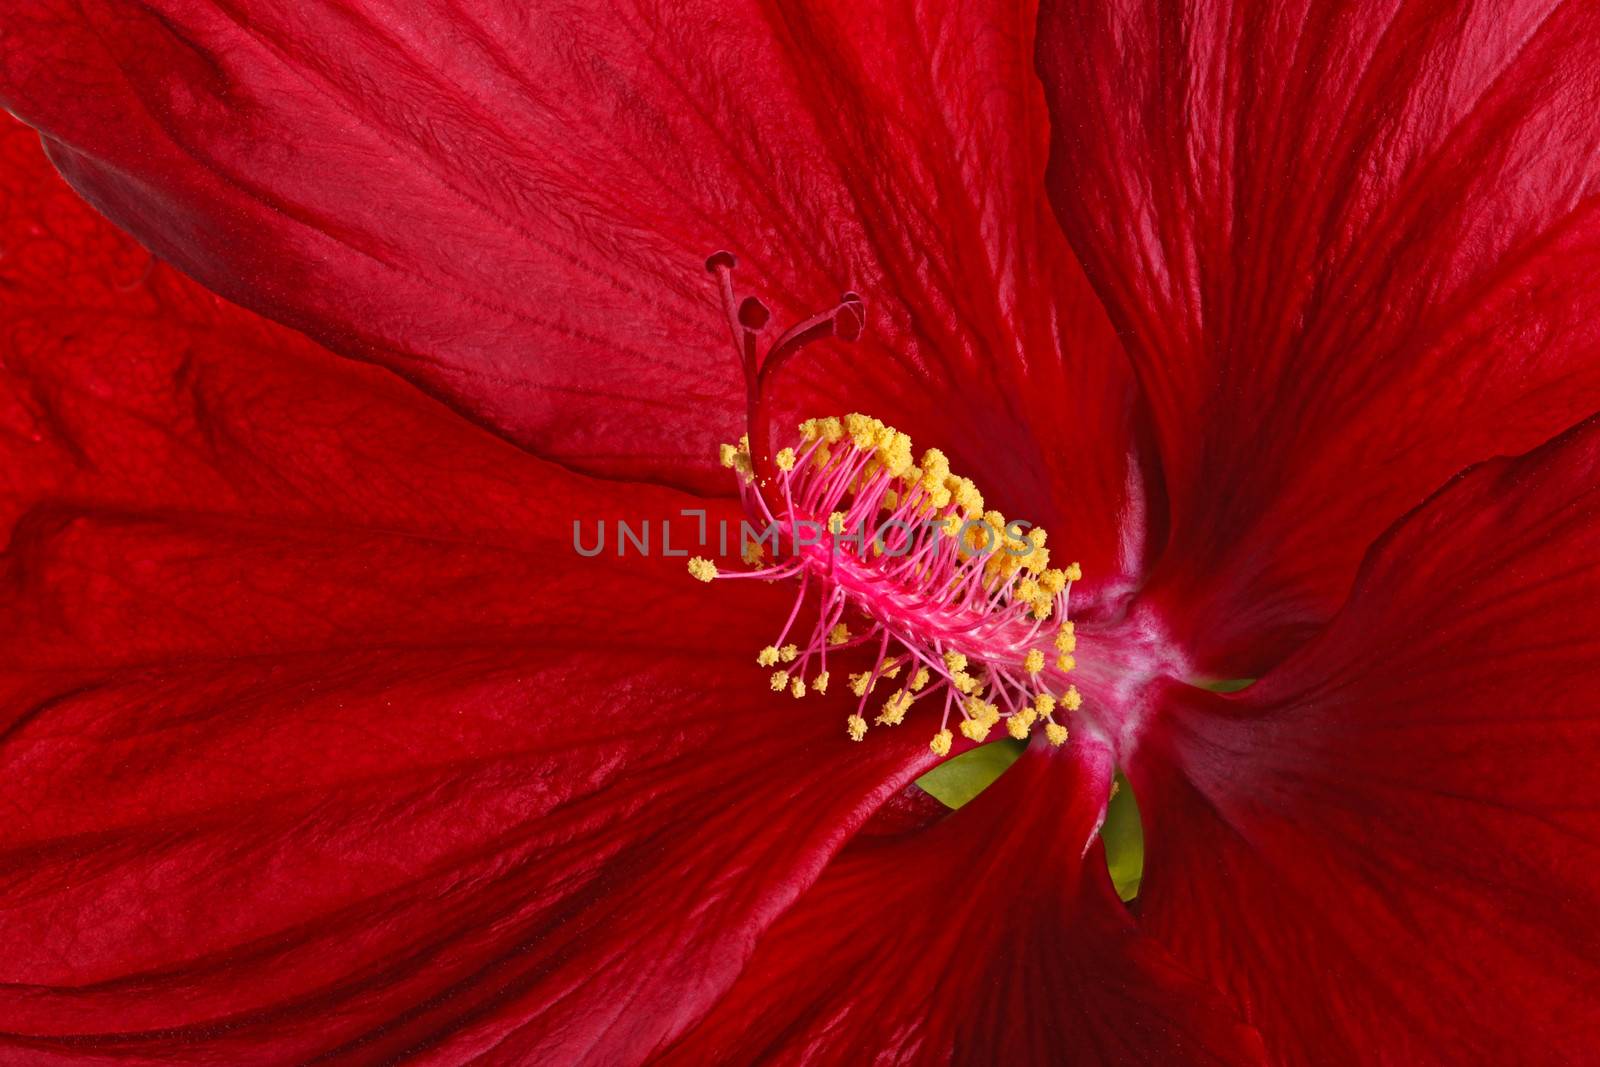 Close-up view of a dark red flower of hibiscus (Hibiscus moscheutos hybrid, swamp-rose mallow or rose mallow) showing the pistil with four stigmas and stamen with multiple anthers bearing yellow pollen